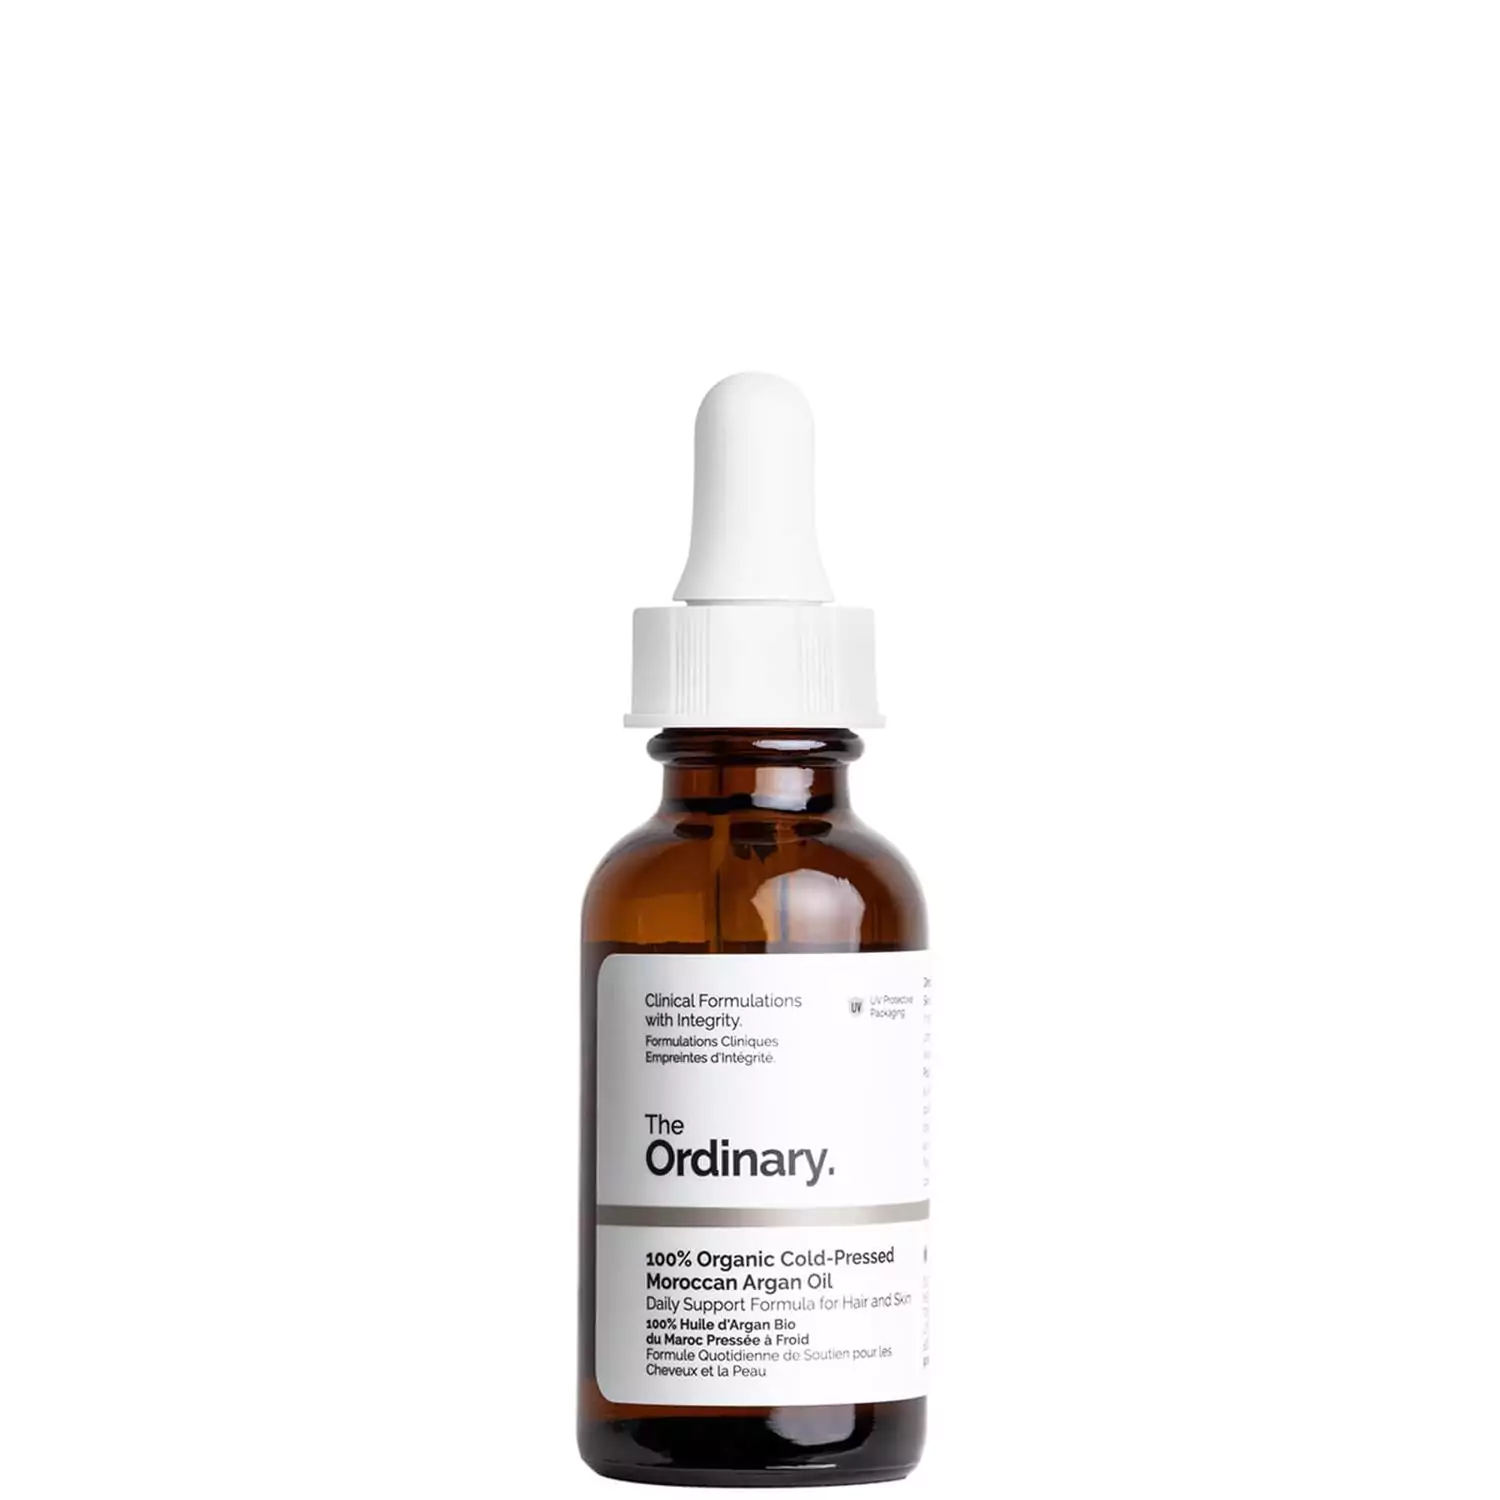 The Ordinary 100% Organic Cold-Pressed Argan Oil 30ml Discounts and Cashback